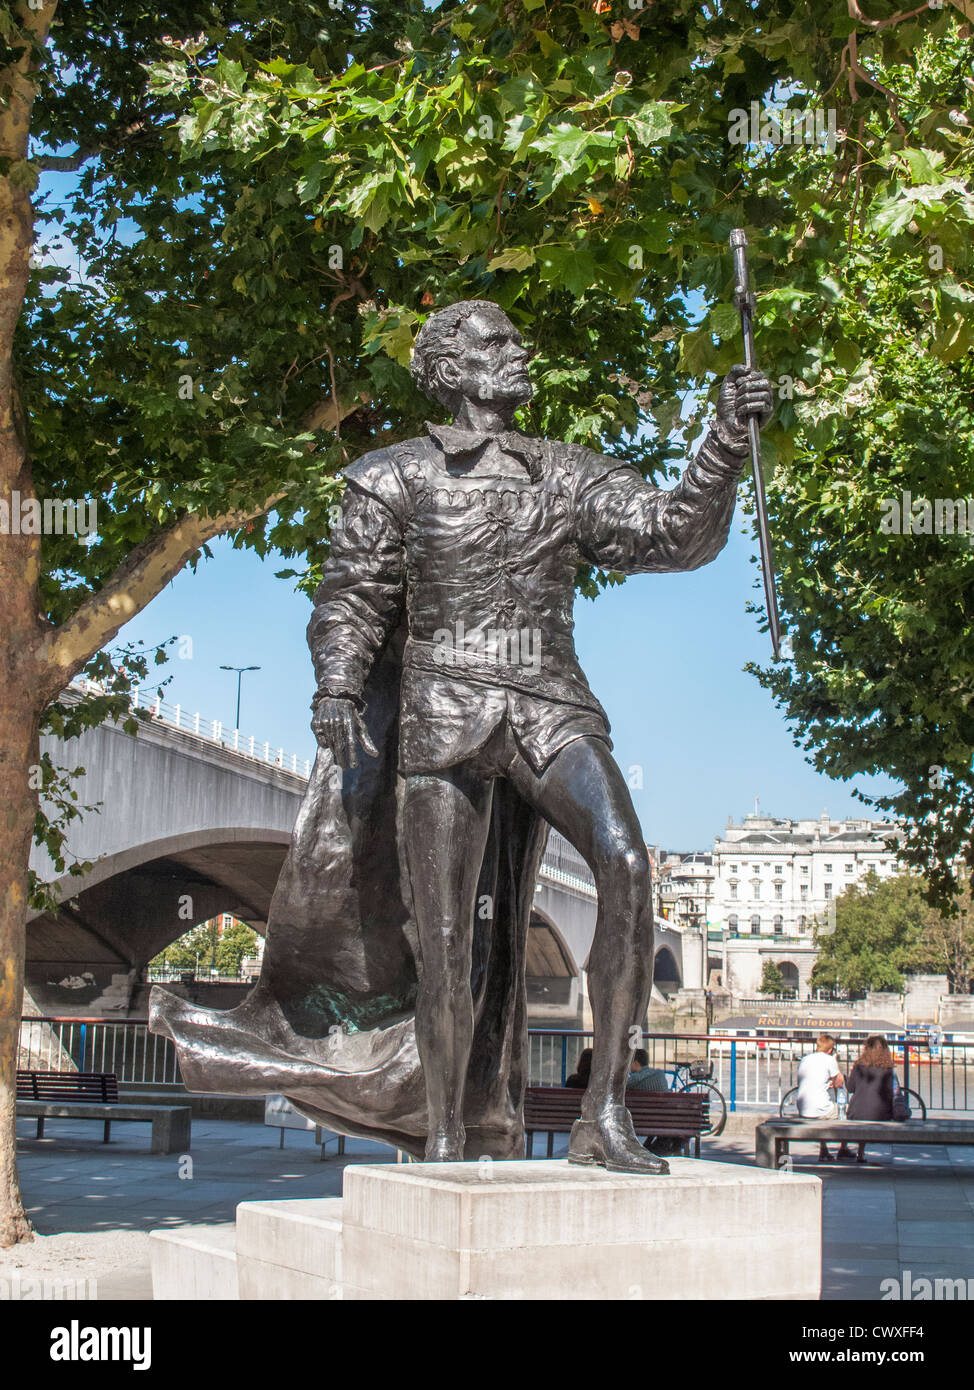 Statue of Laurence Olivier, actor, outside the National Theatre, South Bank on the Embankment in London, England Stock Photo